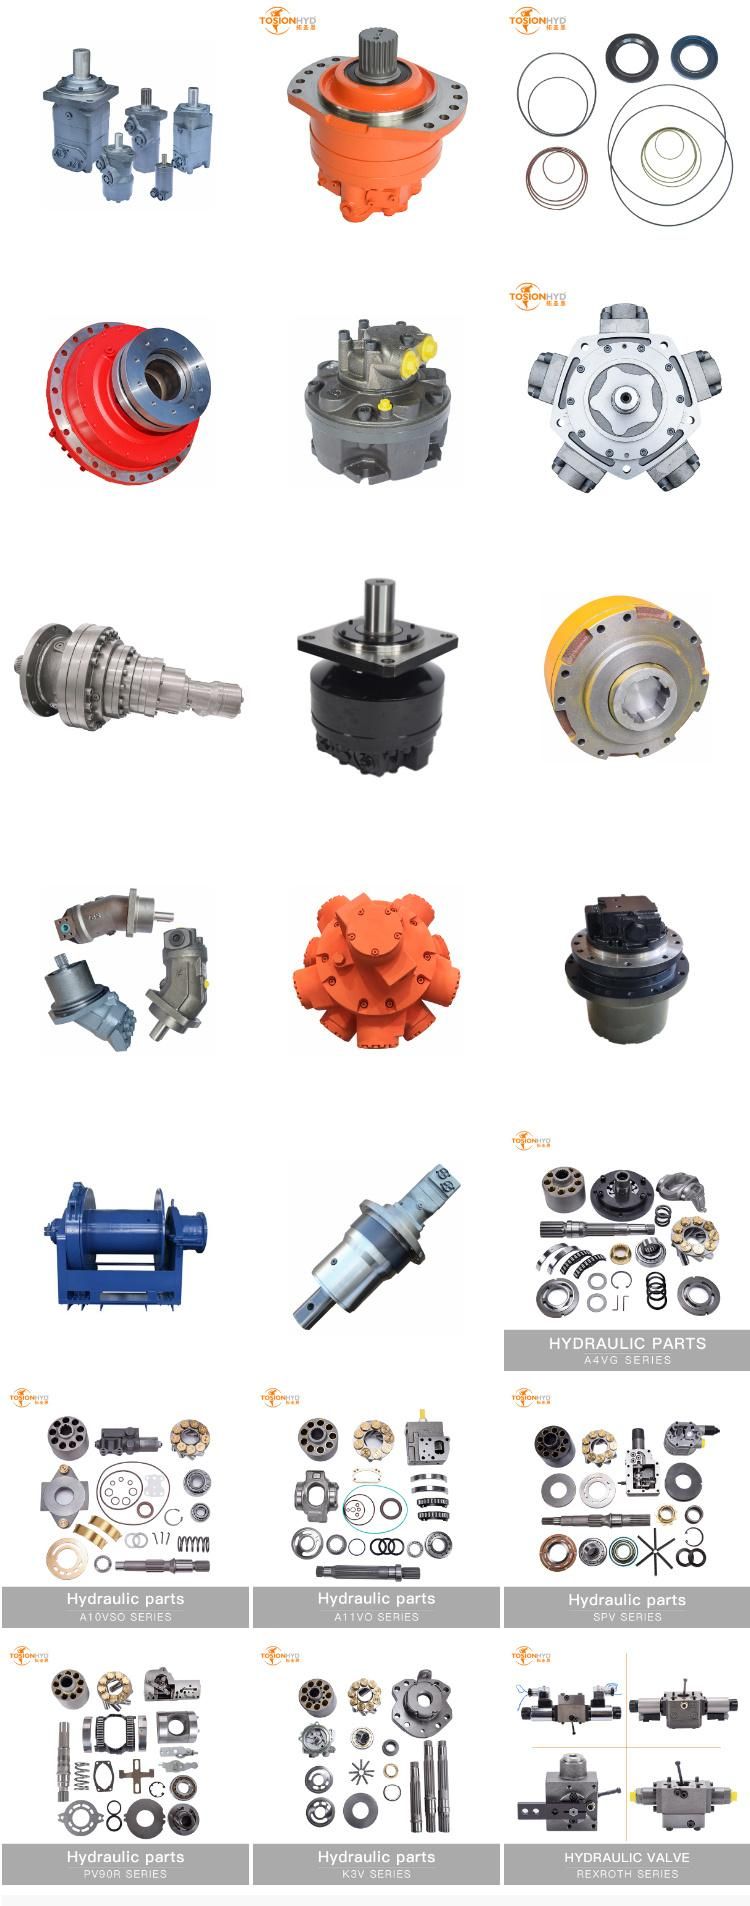 A2fe 63 Hydraulic Motor Parts with Rexroth Spare Repair Kits